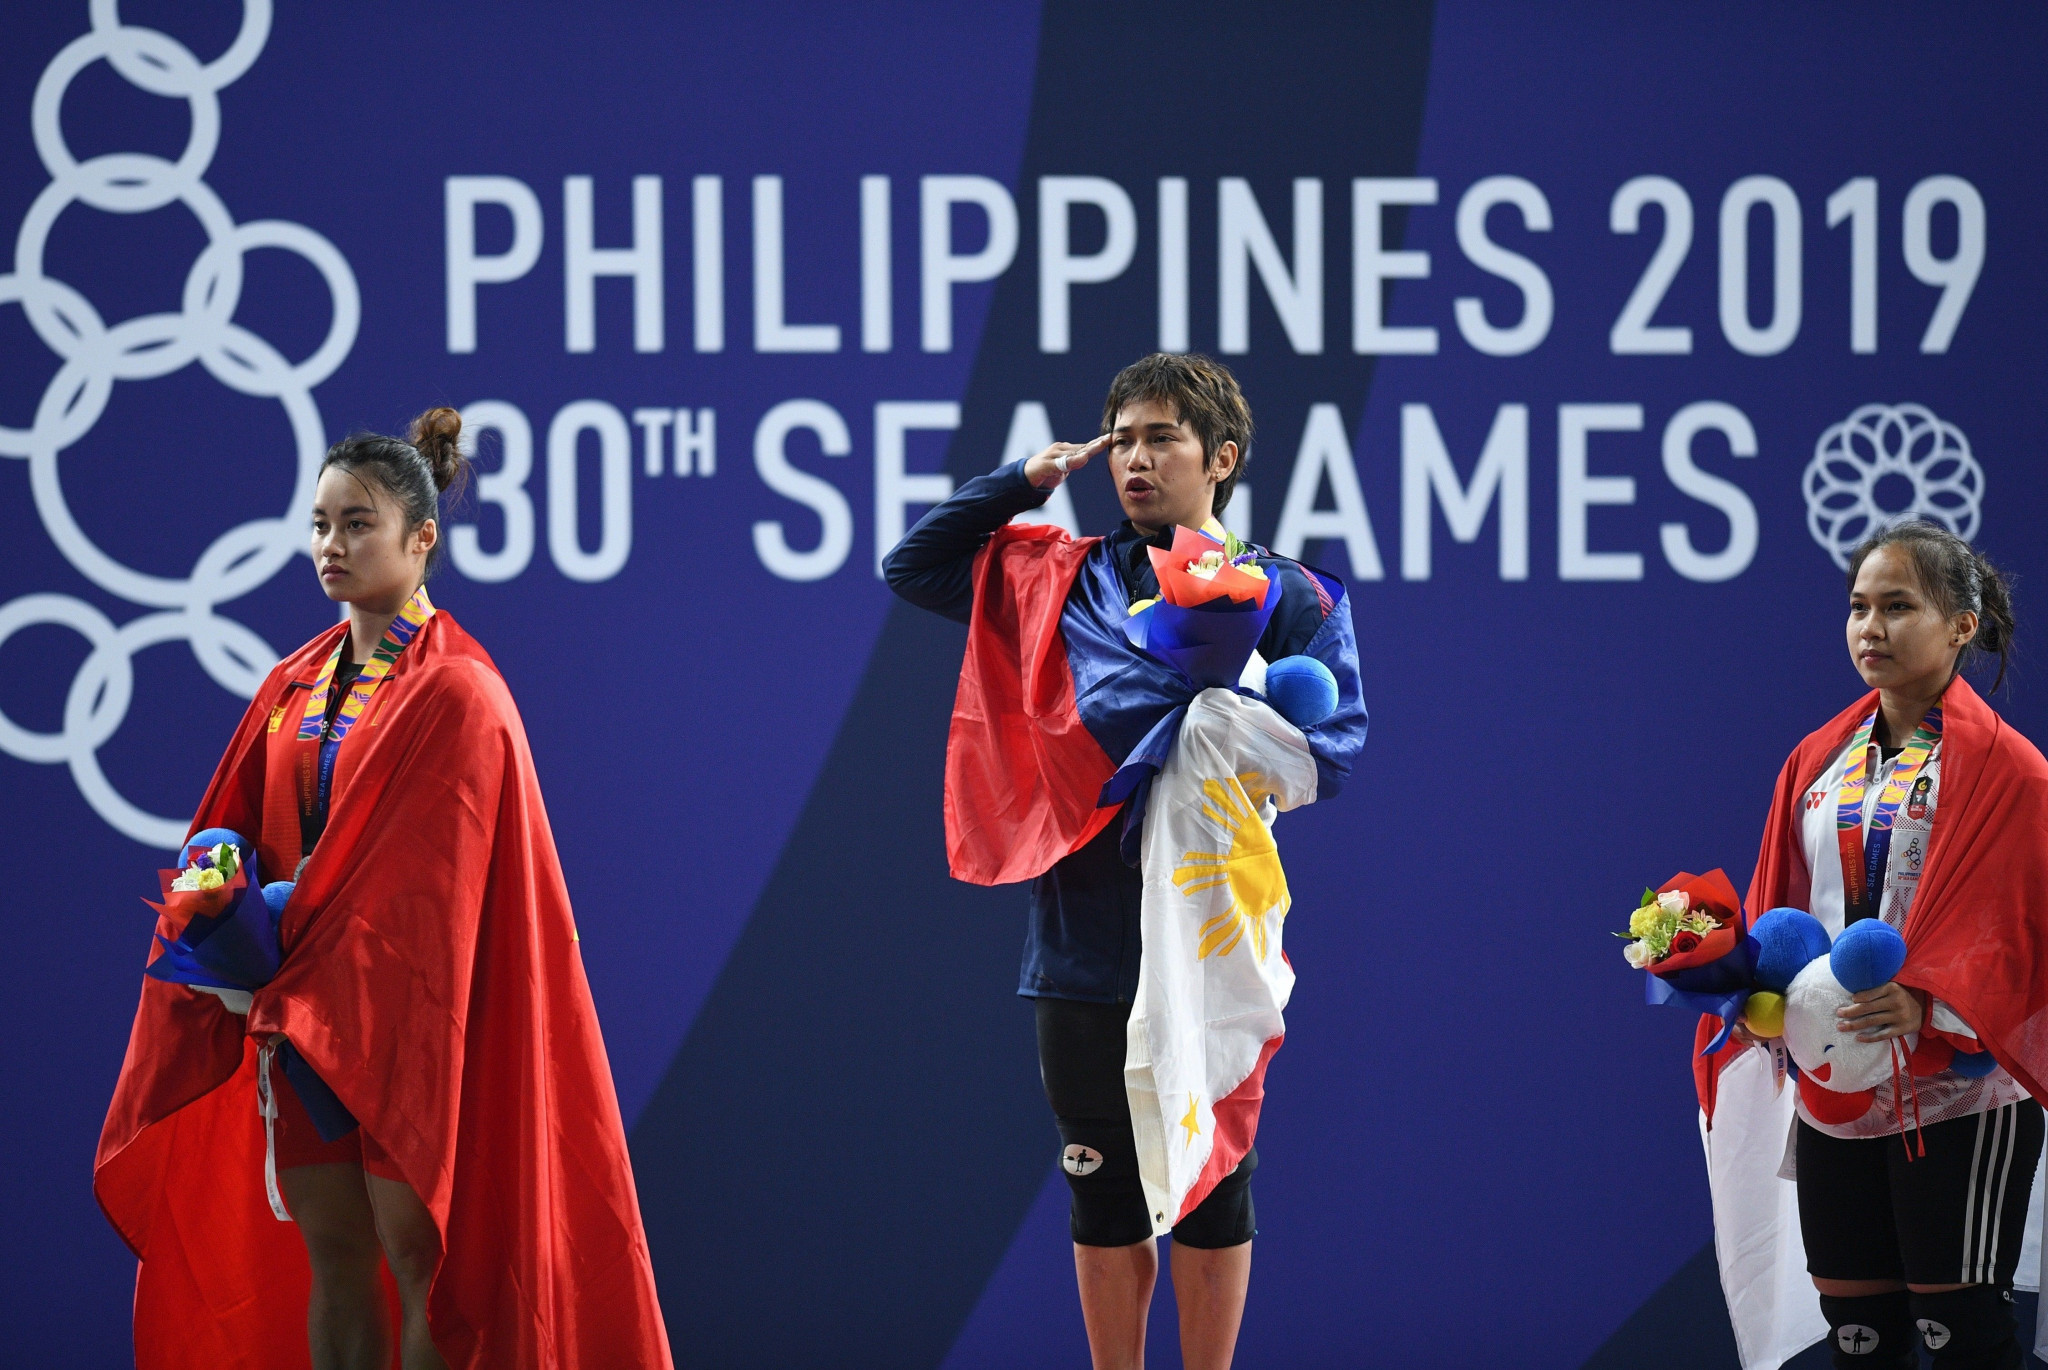 Weightlifter Hidilyn Diaz was one of hosts the Philippines' 15 gold medallists on day two of the Southeast Asian Games ©Getty Images